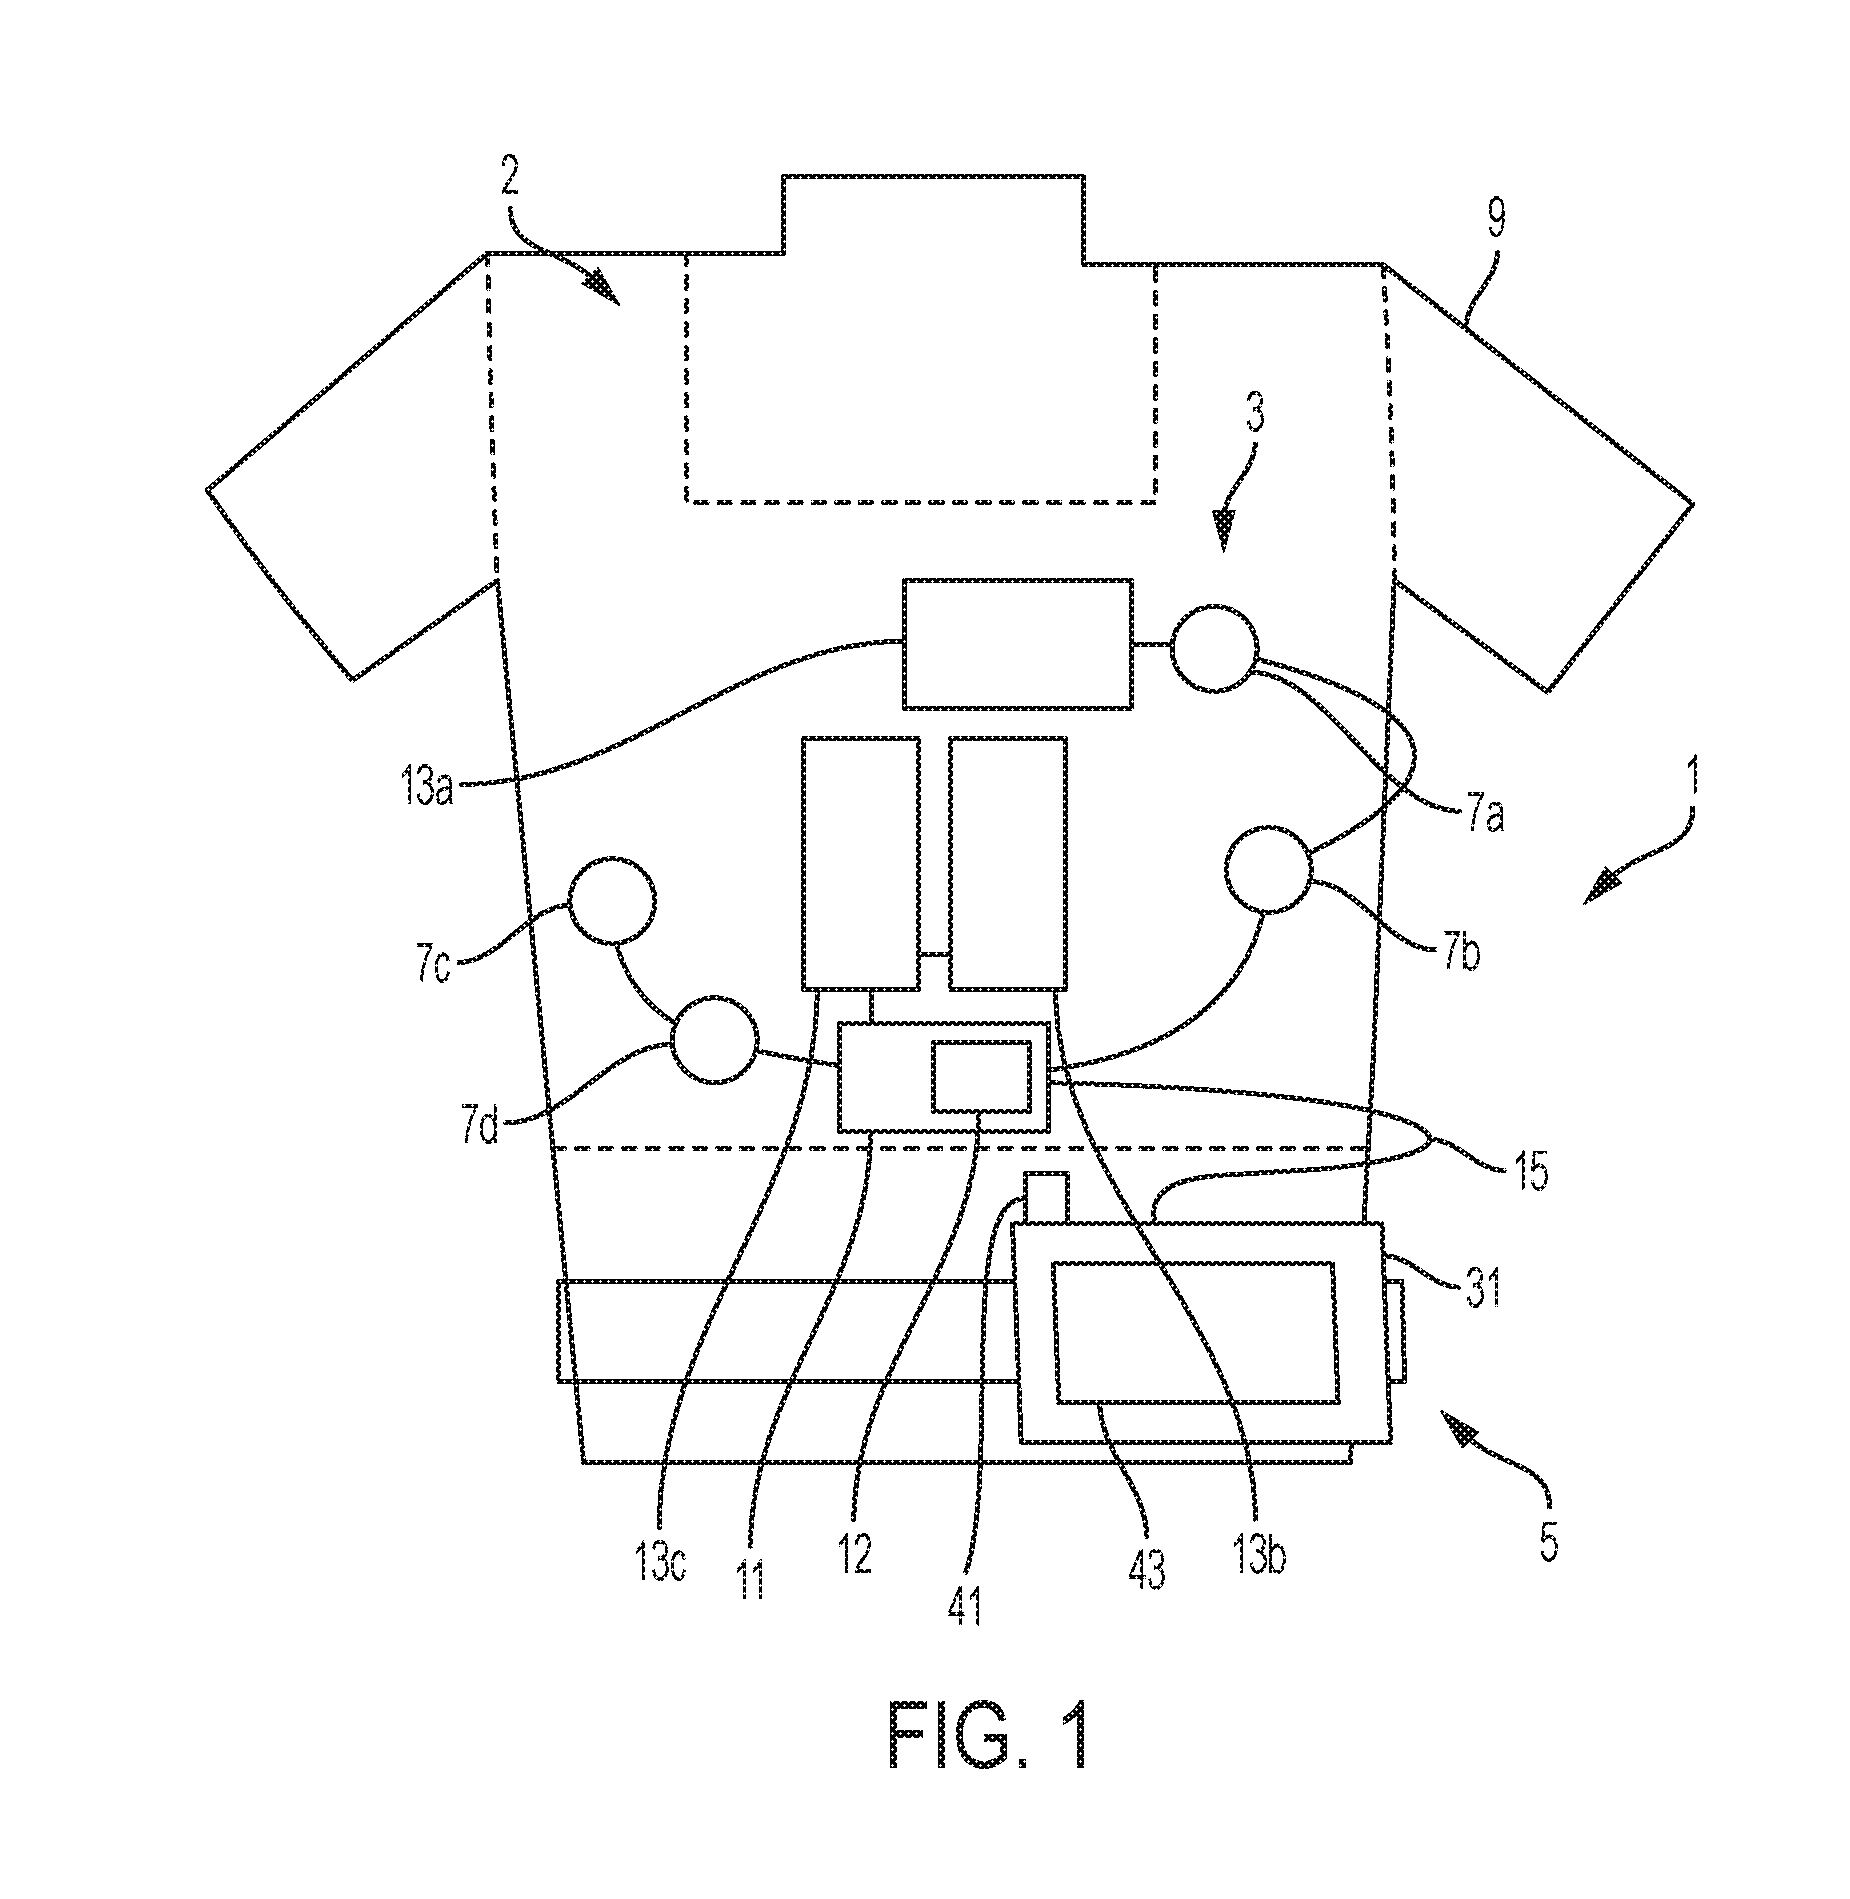 Systems and Methods for Testing a Medical Device